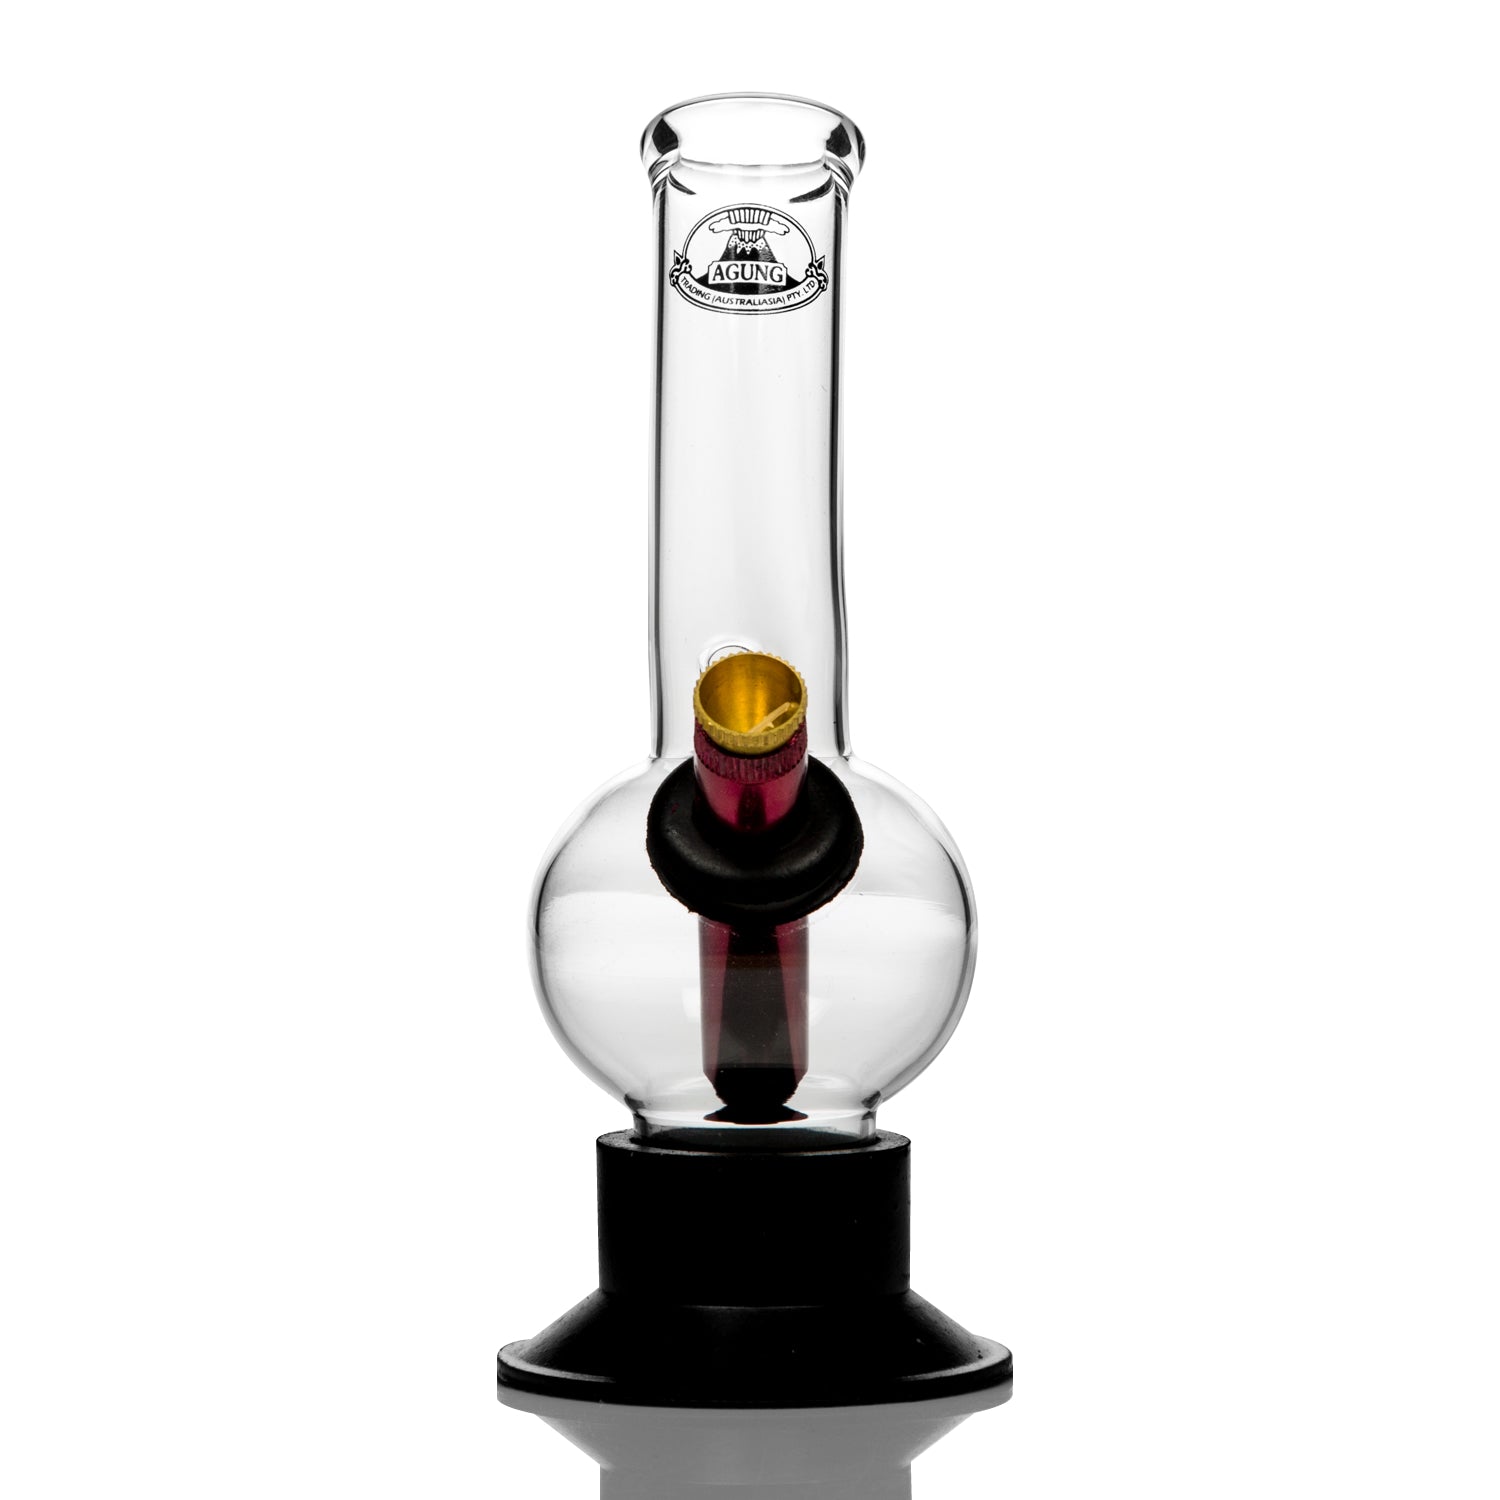 Agung shorty, small sized Australian glass bong with rubber base.